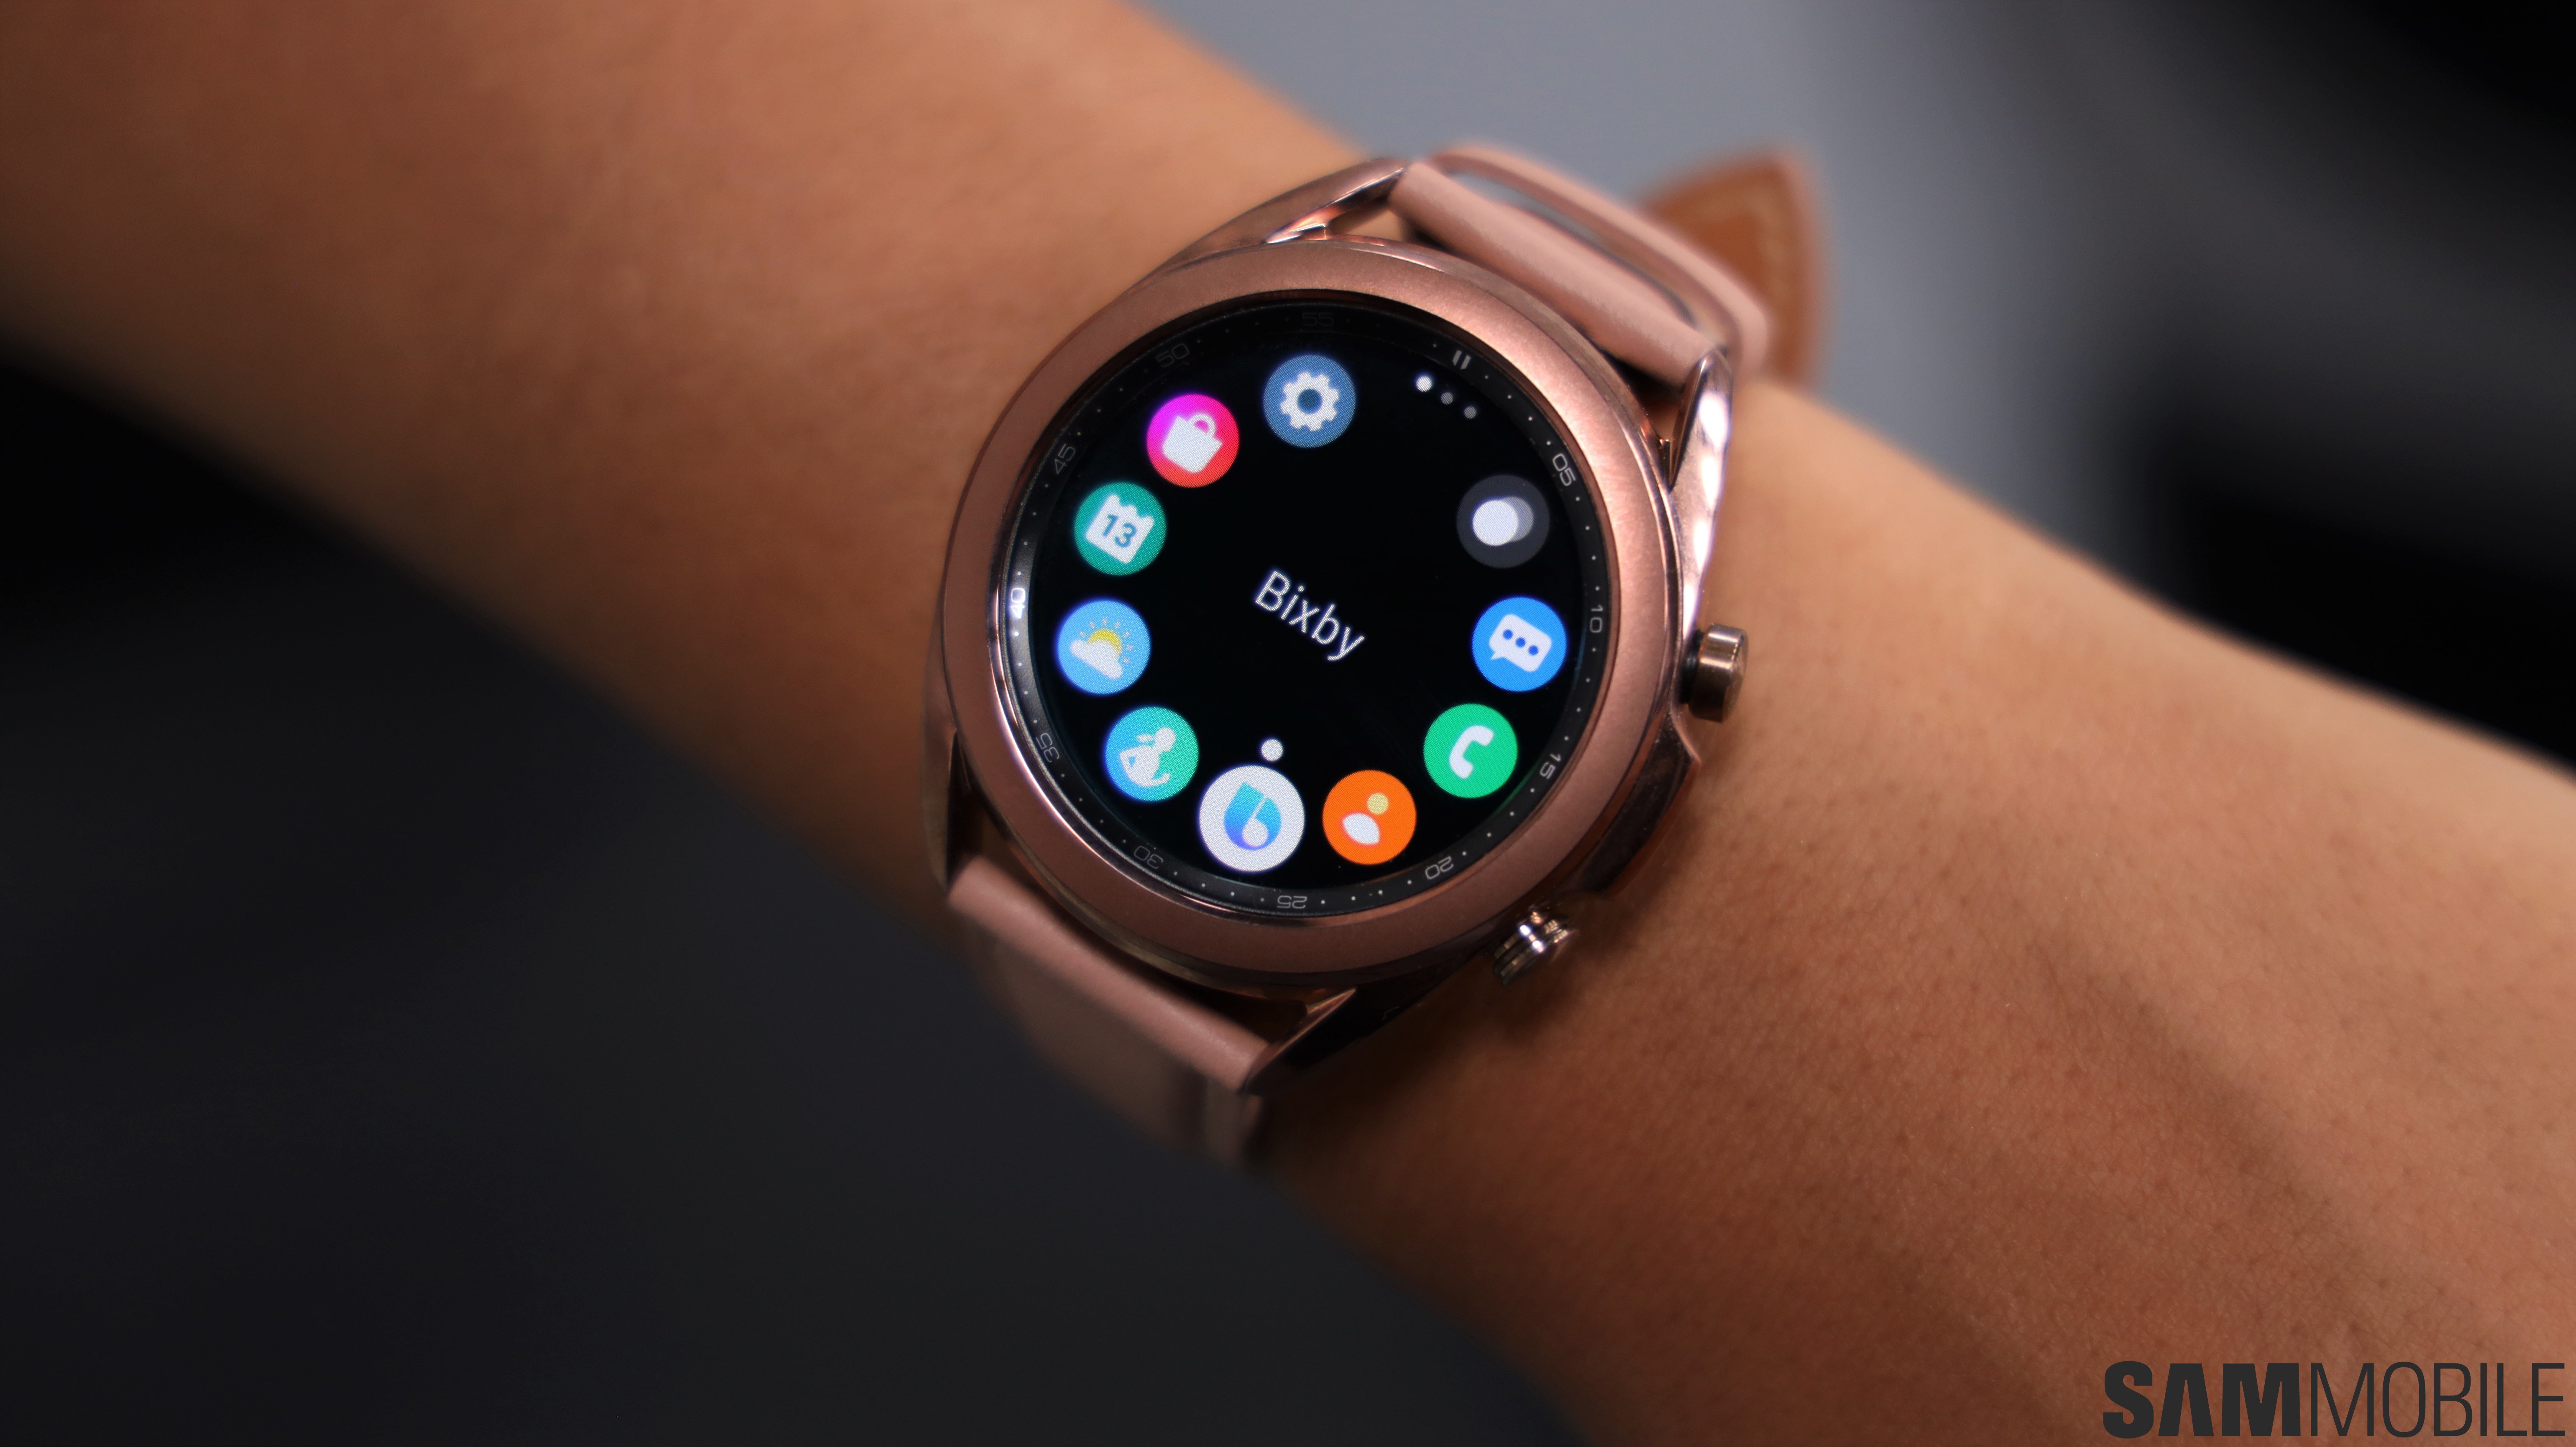 New Galaxy Watch 3 update for Europe improves blood oxygen monitoring - SamMobile